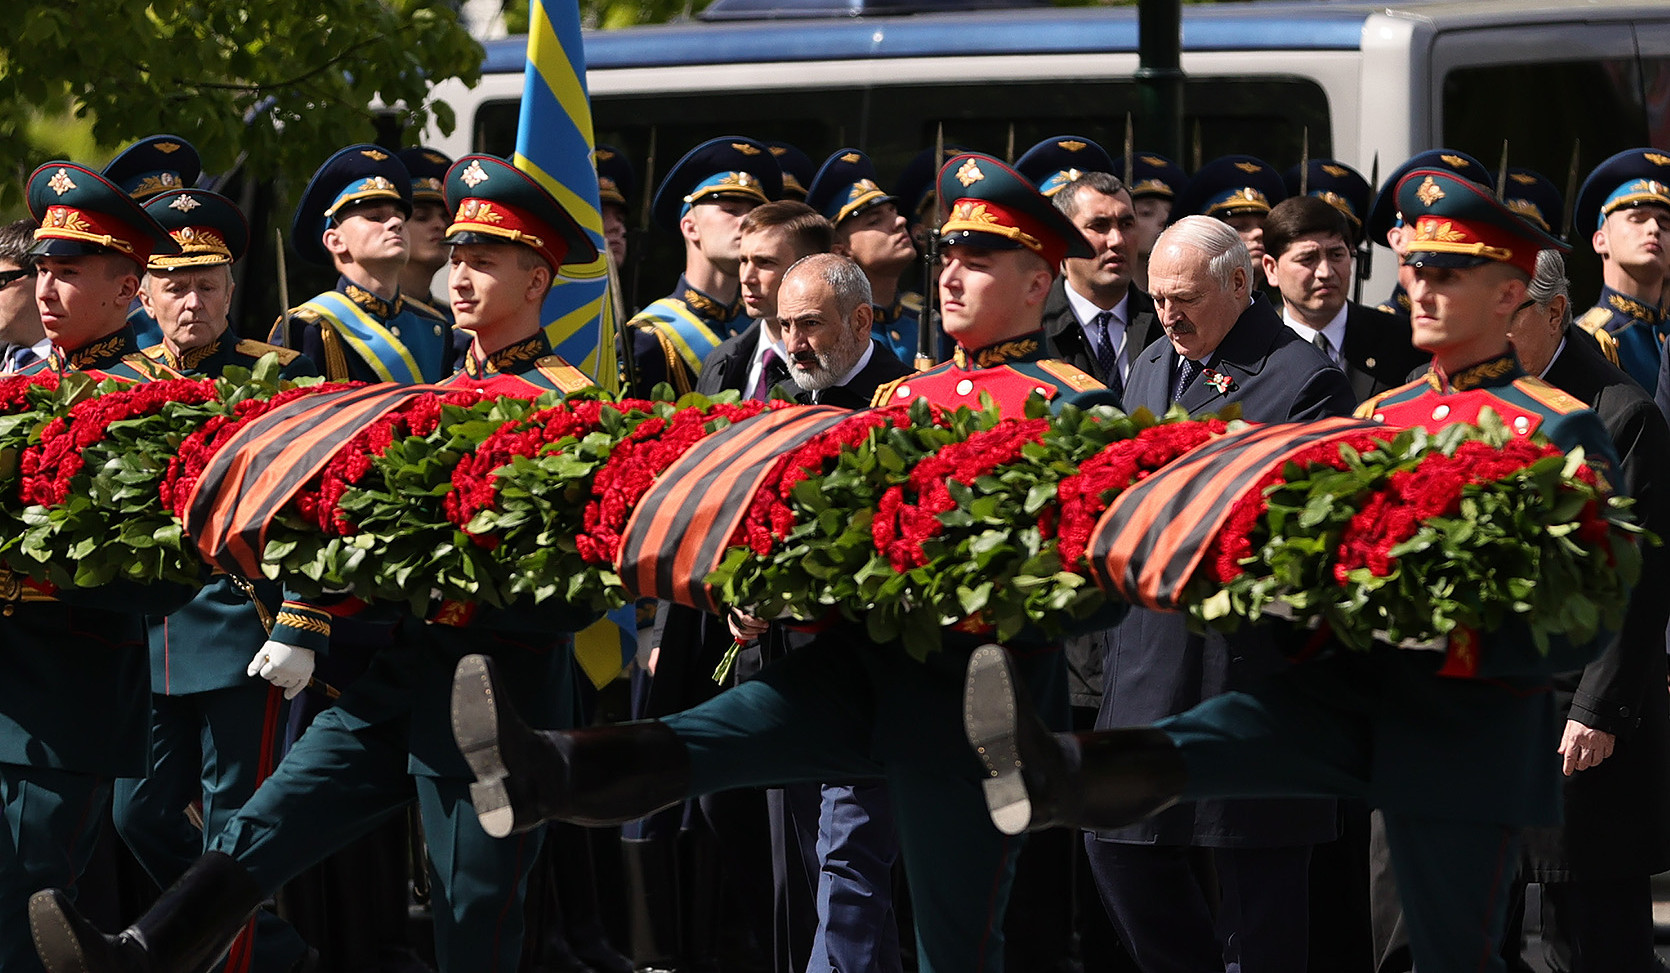 Armenian Prime Minister Pashinyan attends military parade dedicated to victory in Great Patriotic War in Moscow